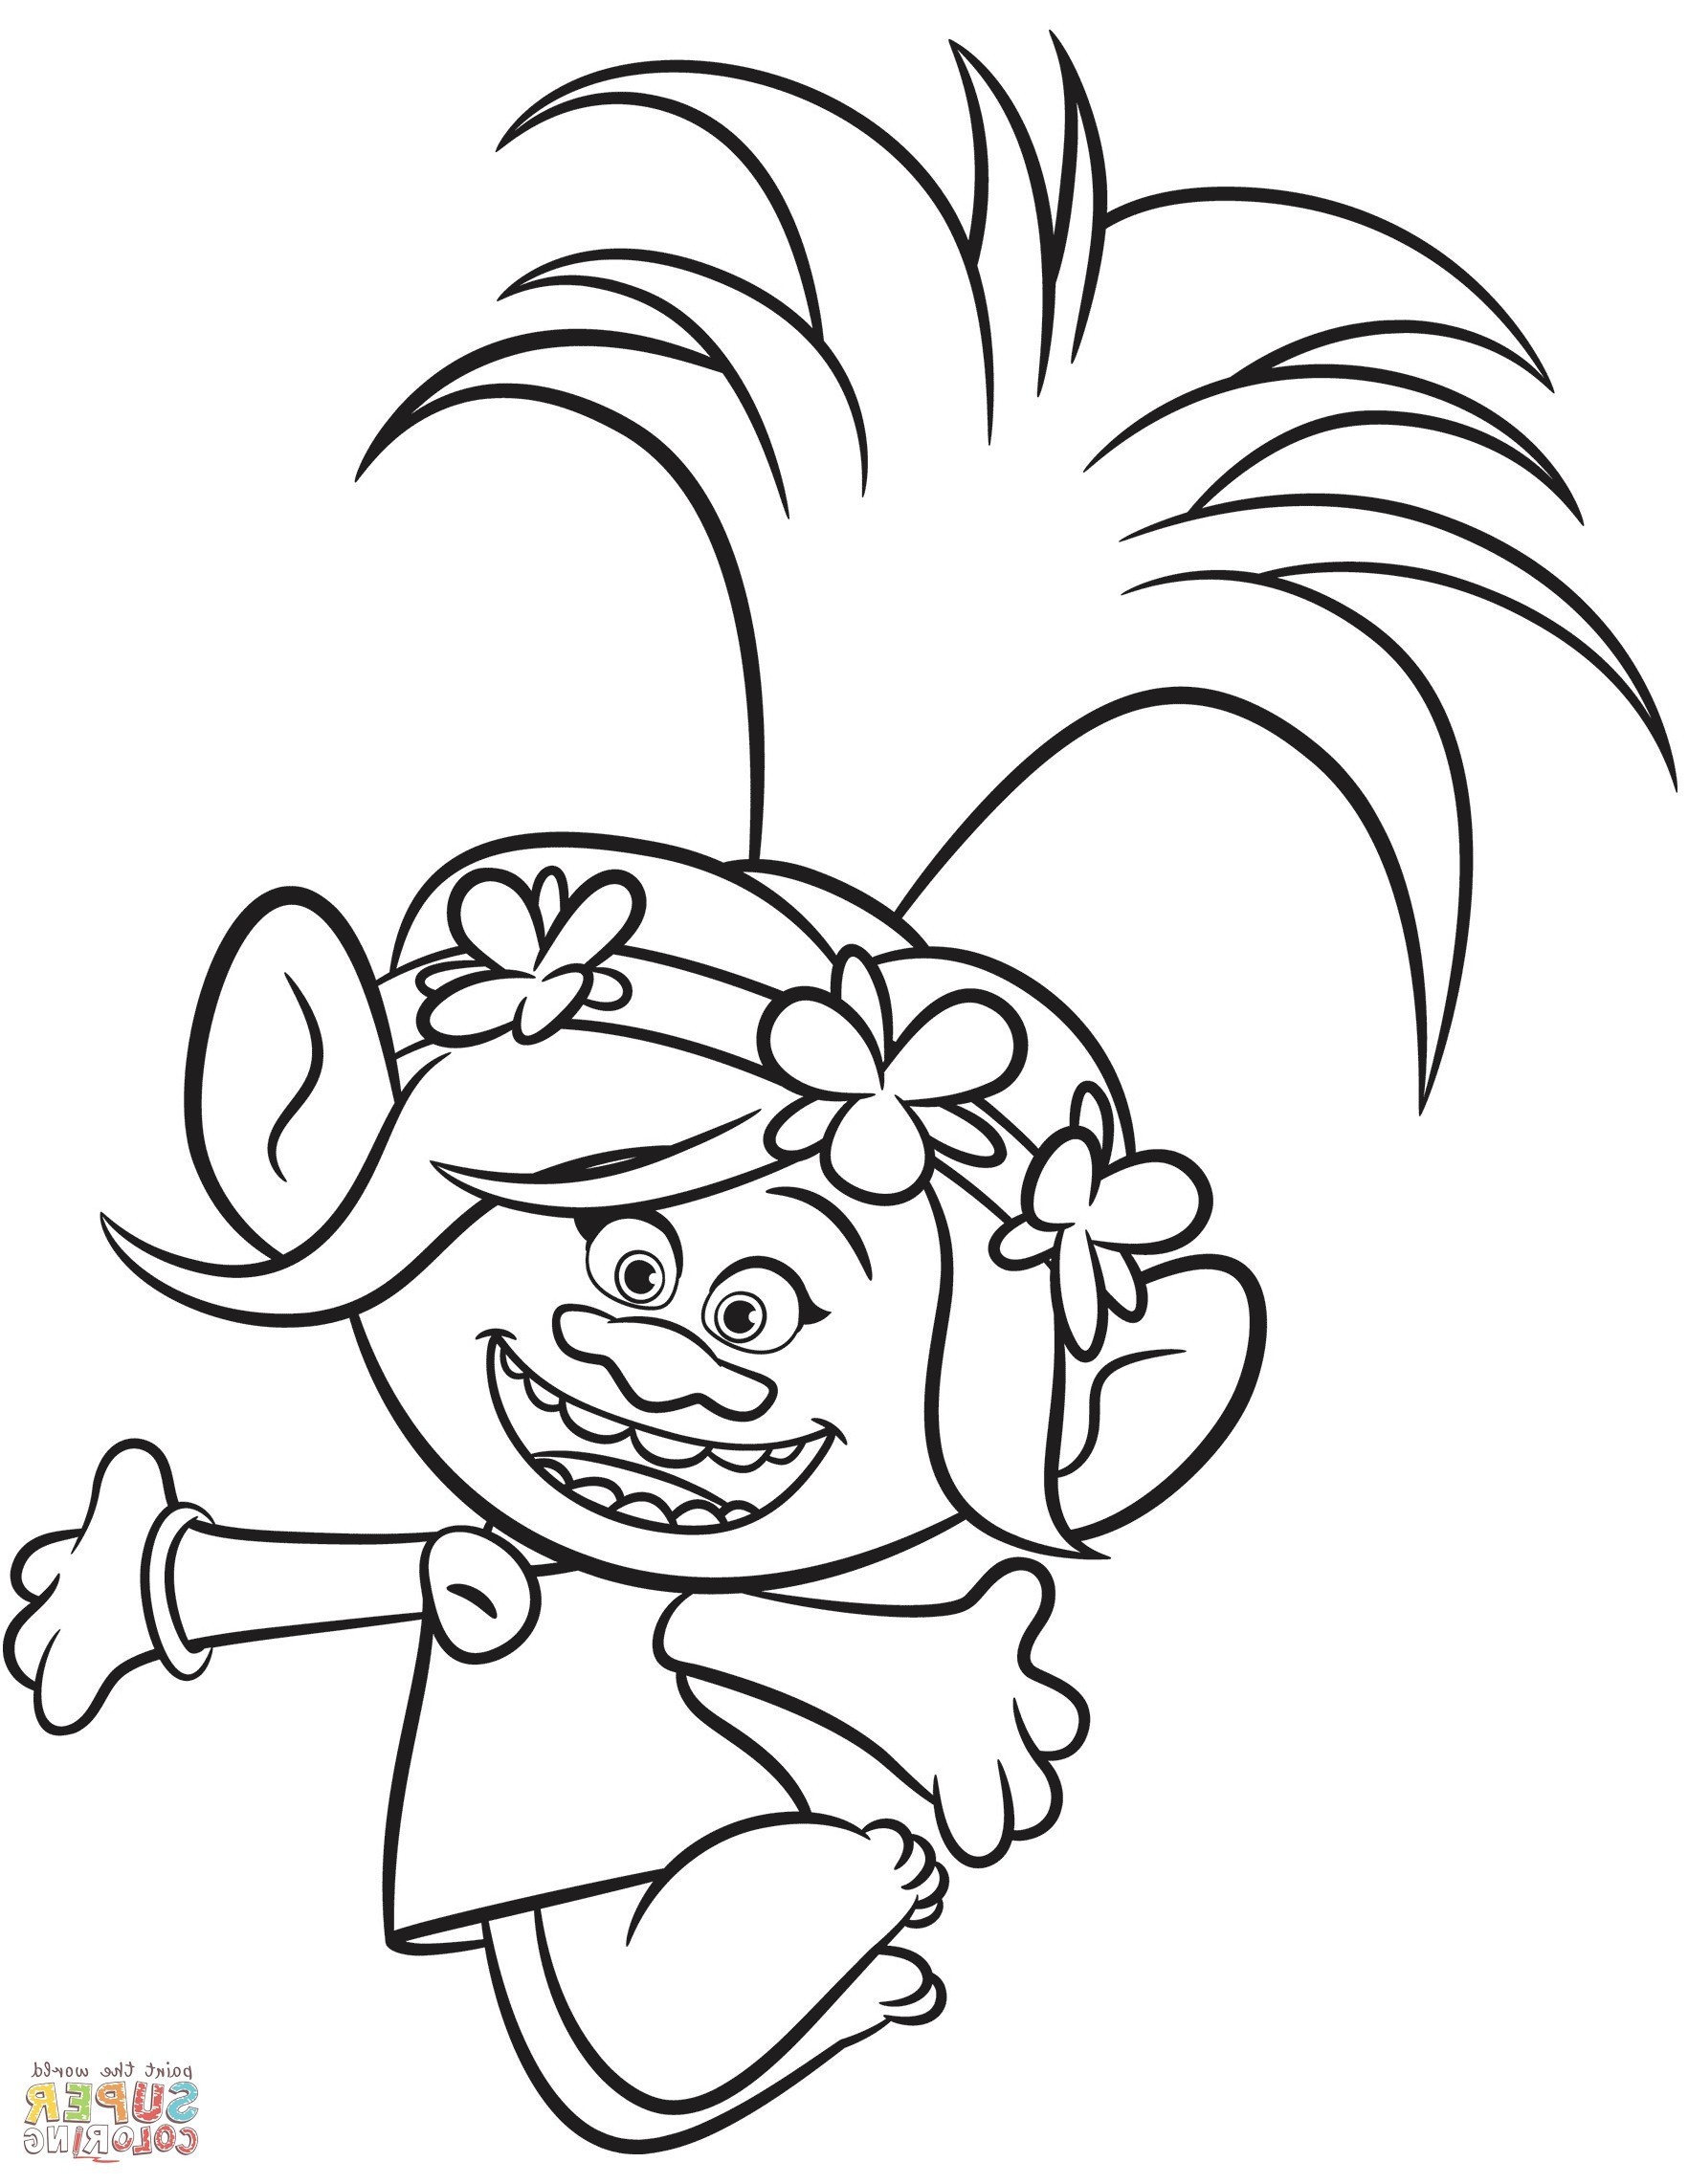 Poppy From Trolls Coloring Pages Wallpaper